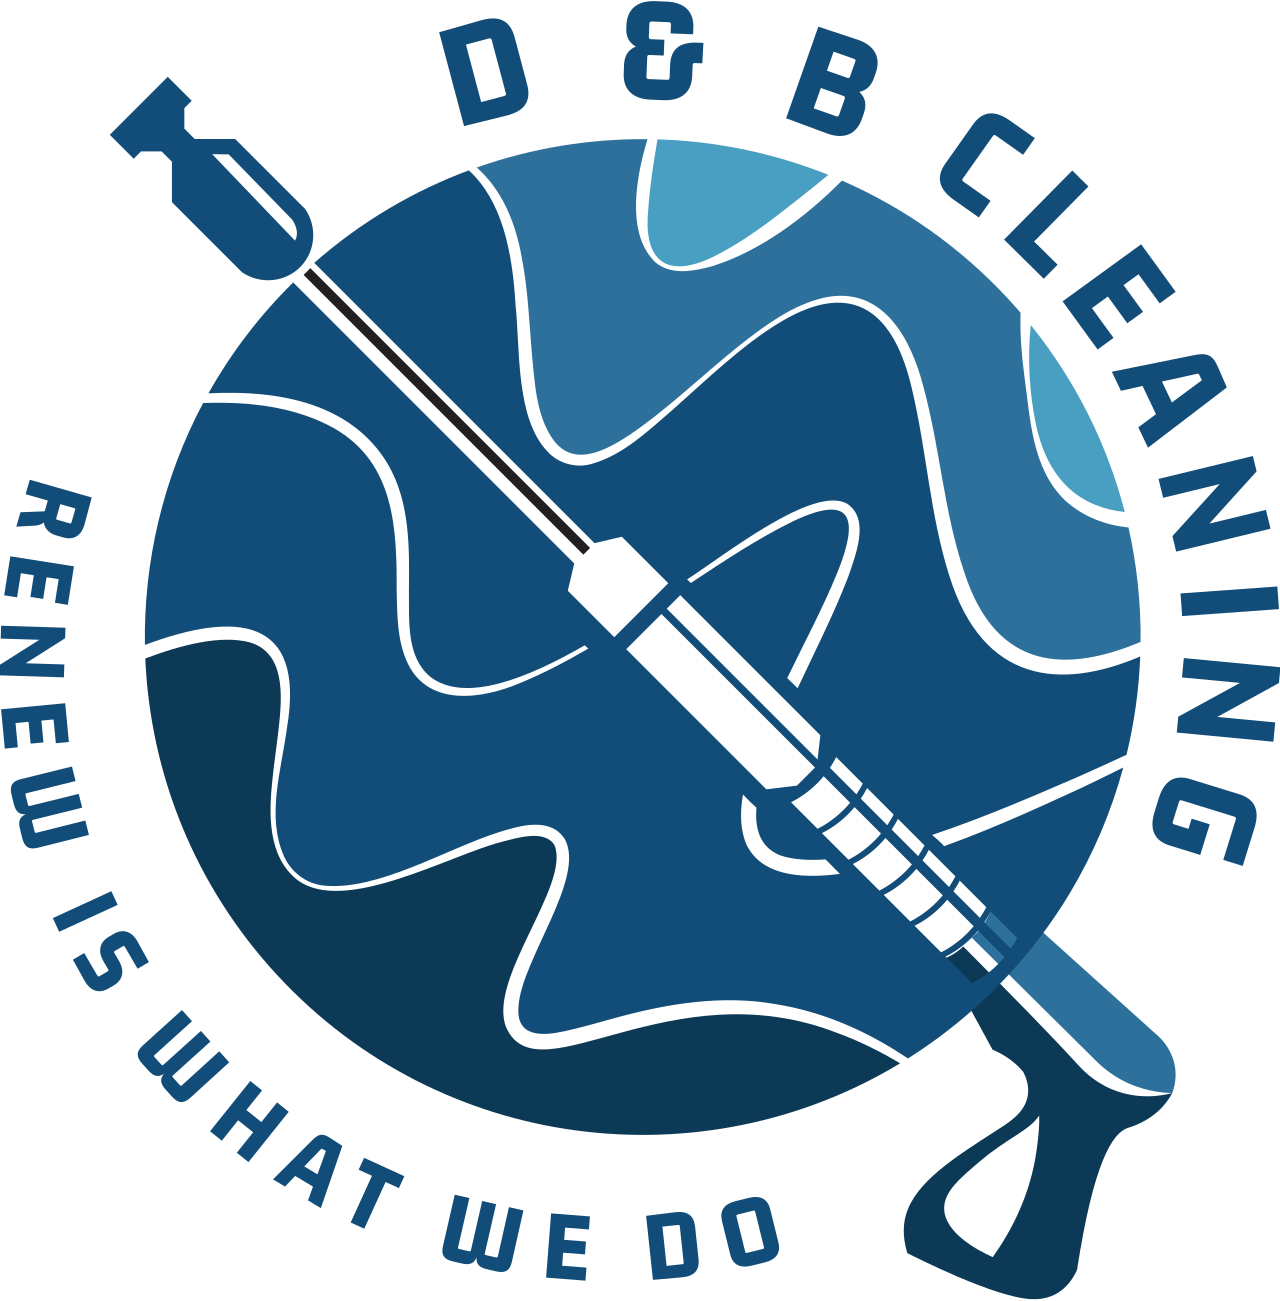 D & B CLEANING's logo